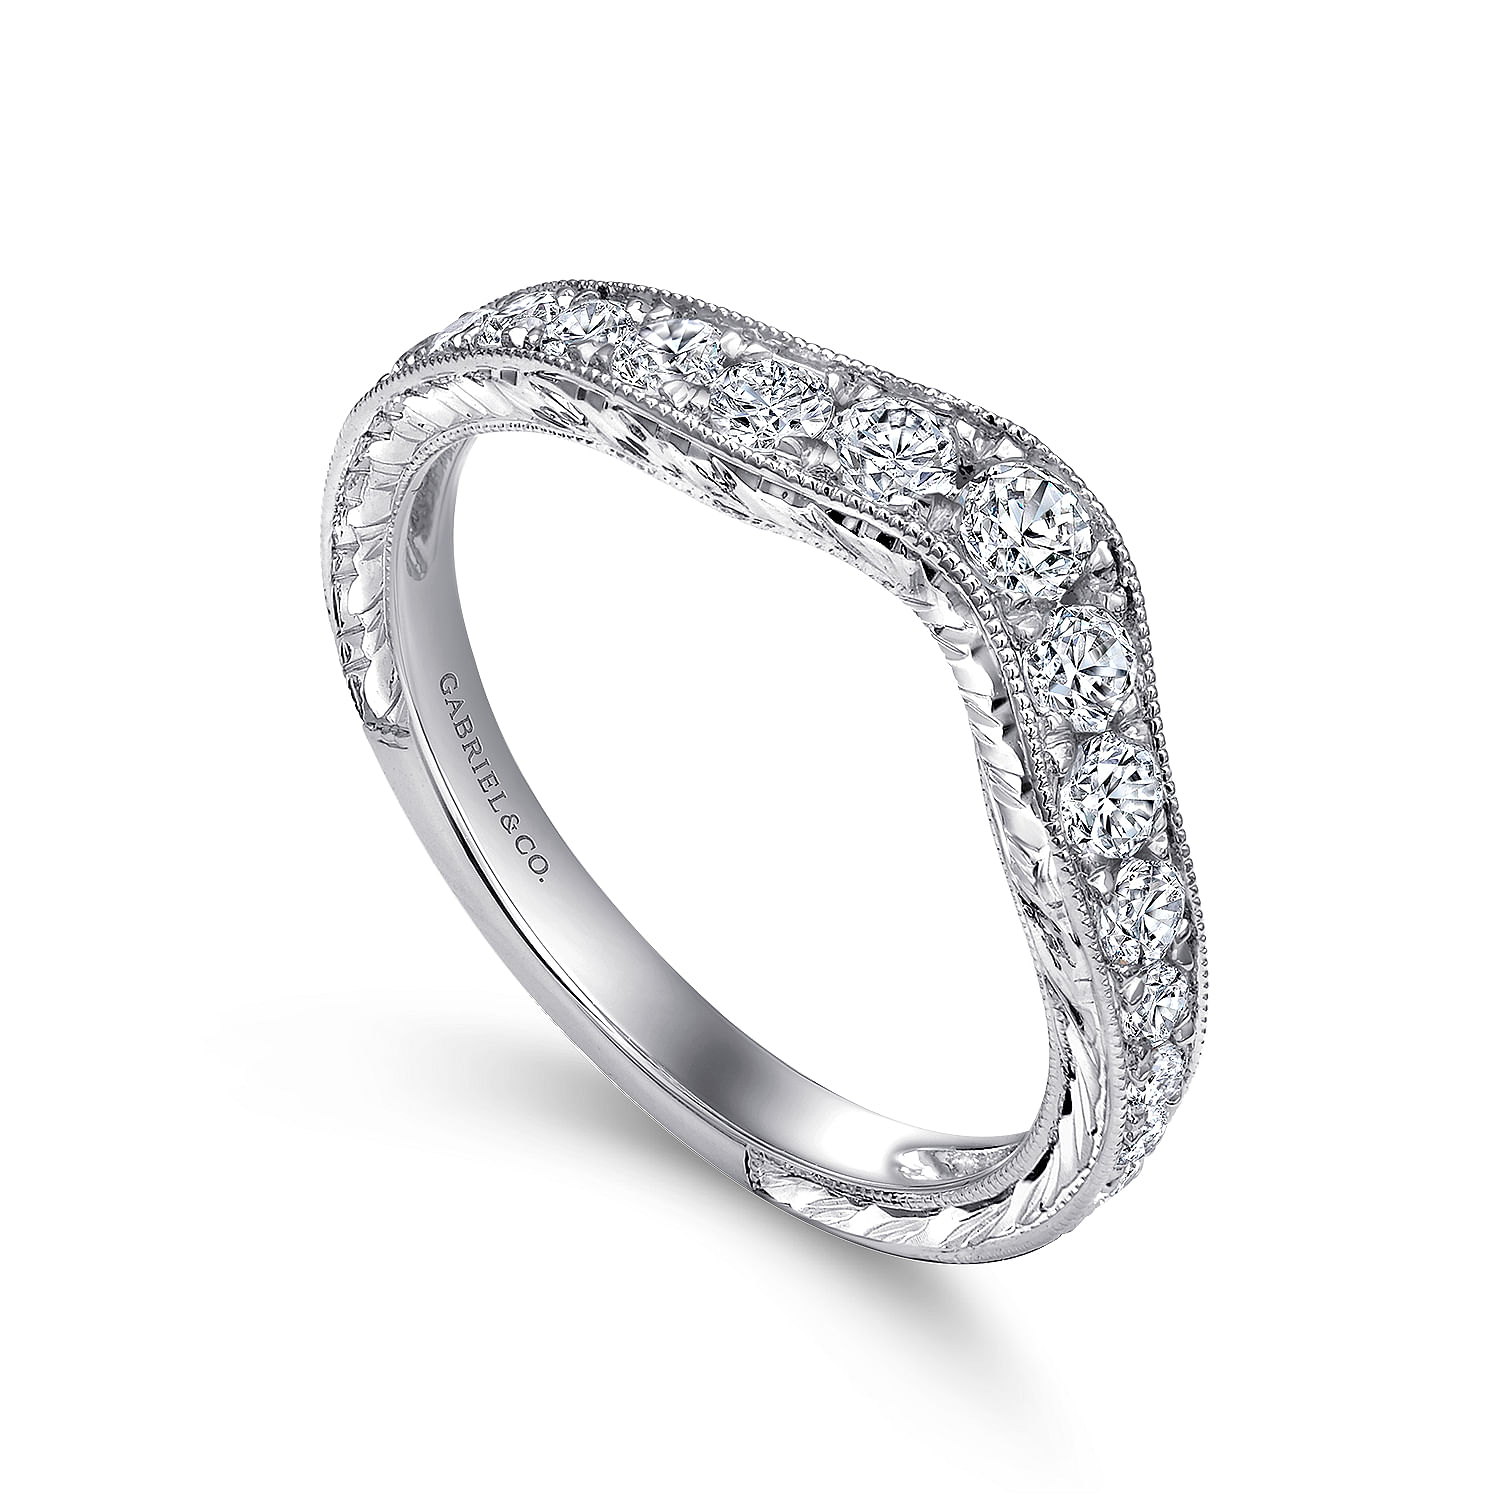 Vintage Inspired  Curved 14K White Gold Micro Pave Diamond Wedding Band with Engraving - 0.5 ct - Shot 3